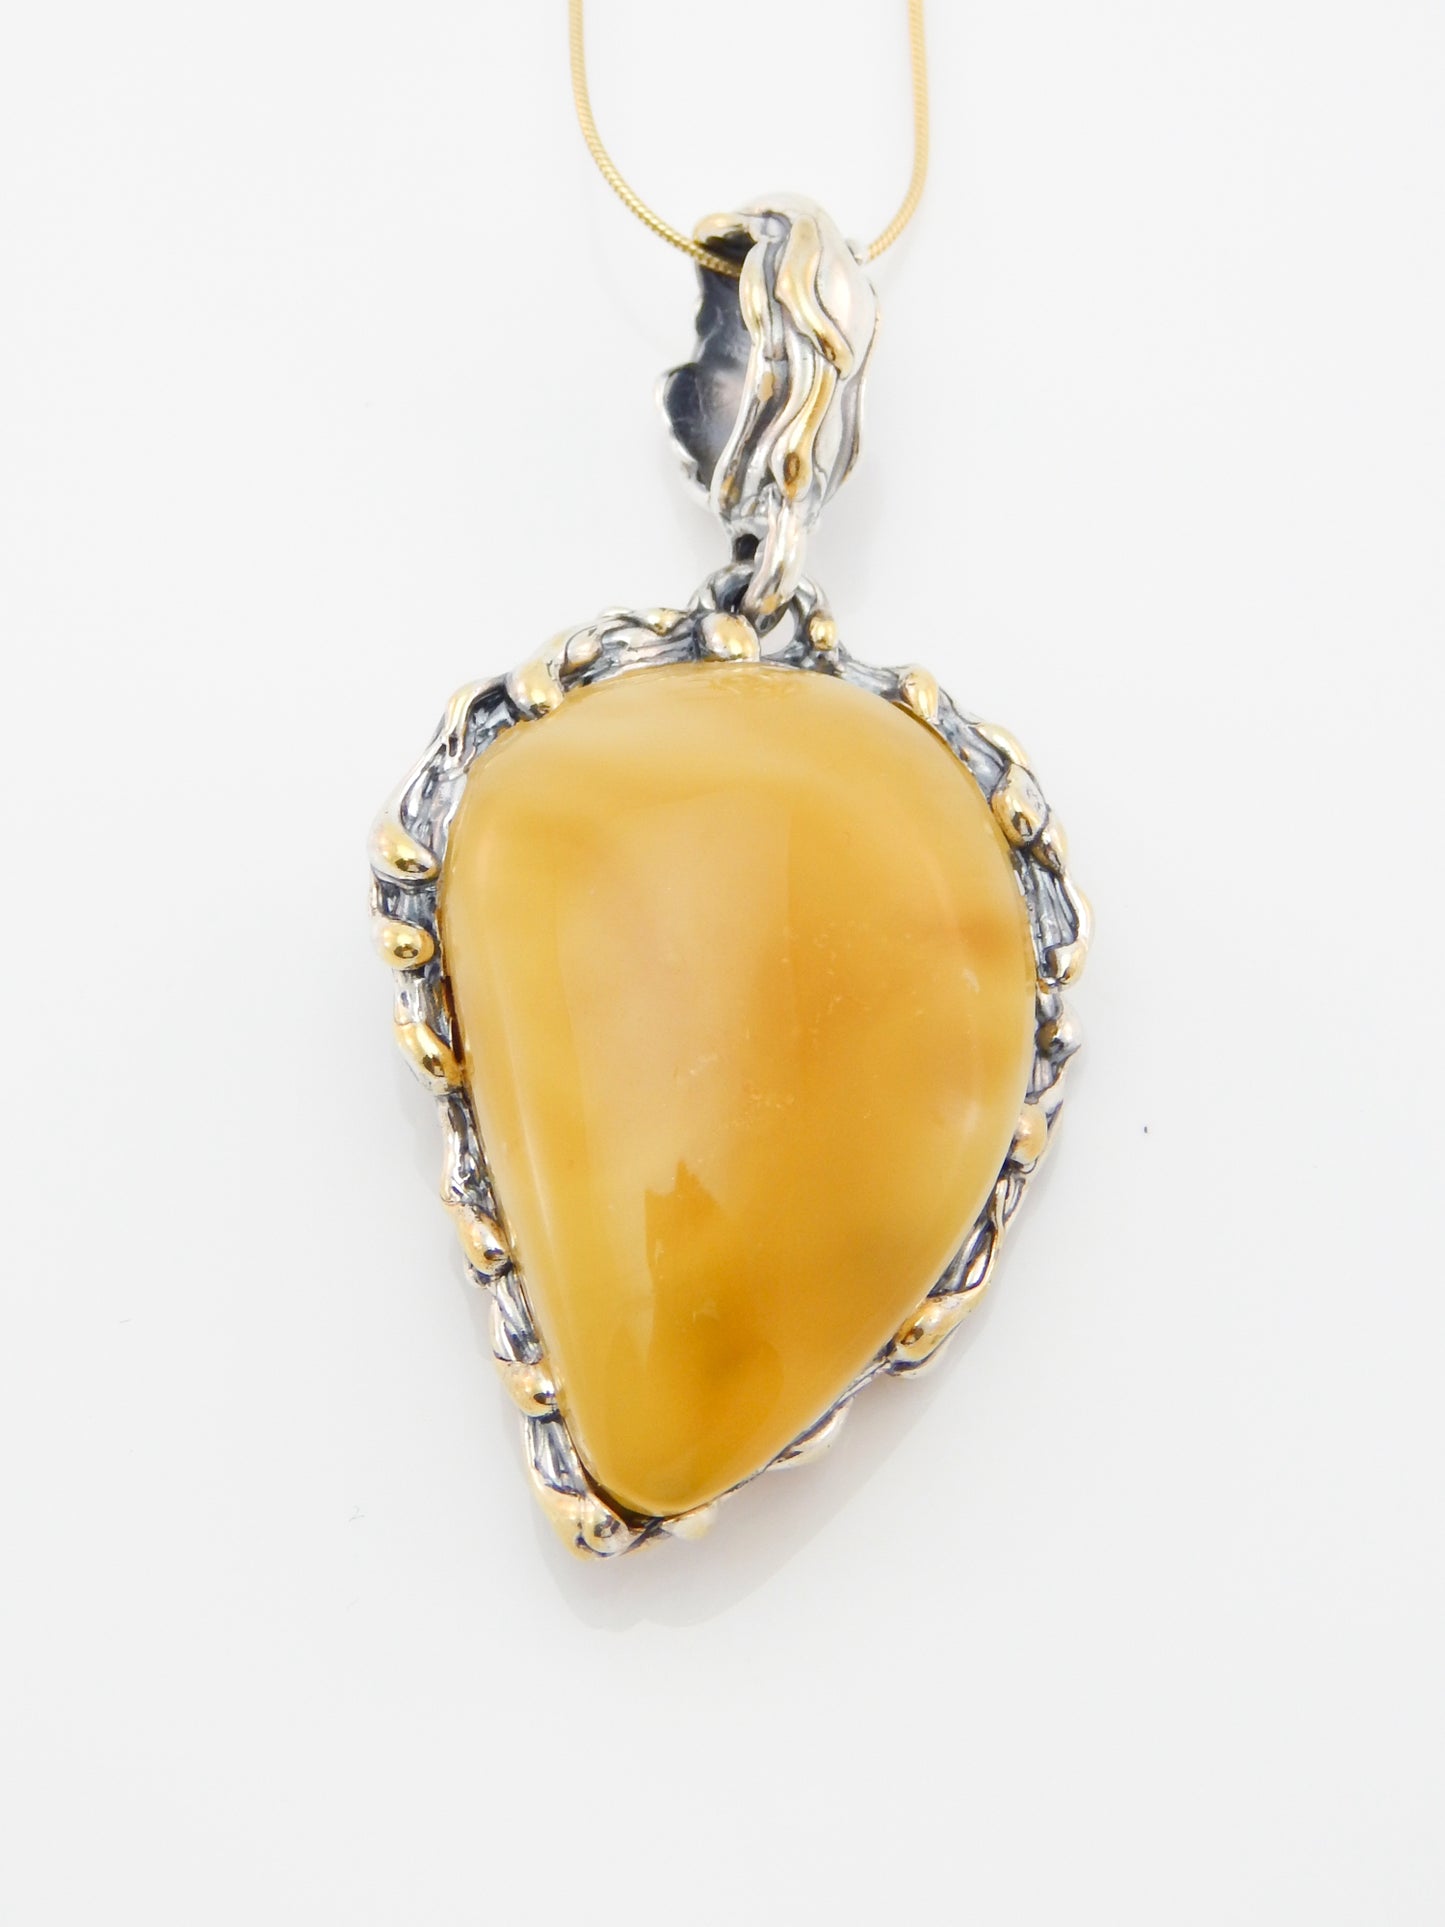 Natural Baltic Butterscotch Sleepy Hallow Limited Edition Pendant Necklace in 925 Sterling Silver